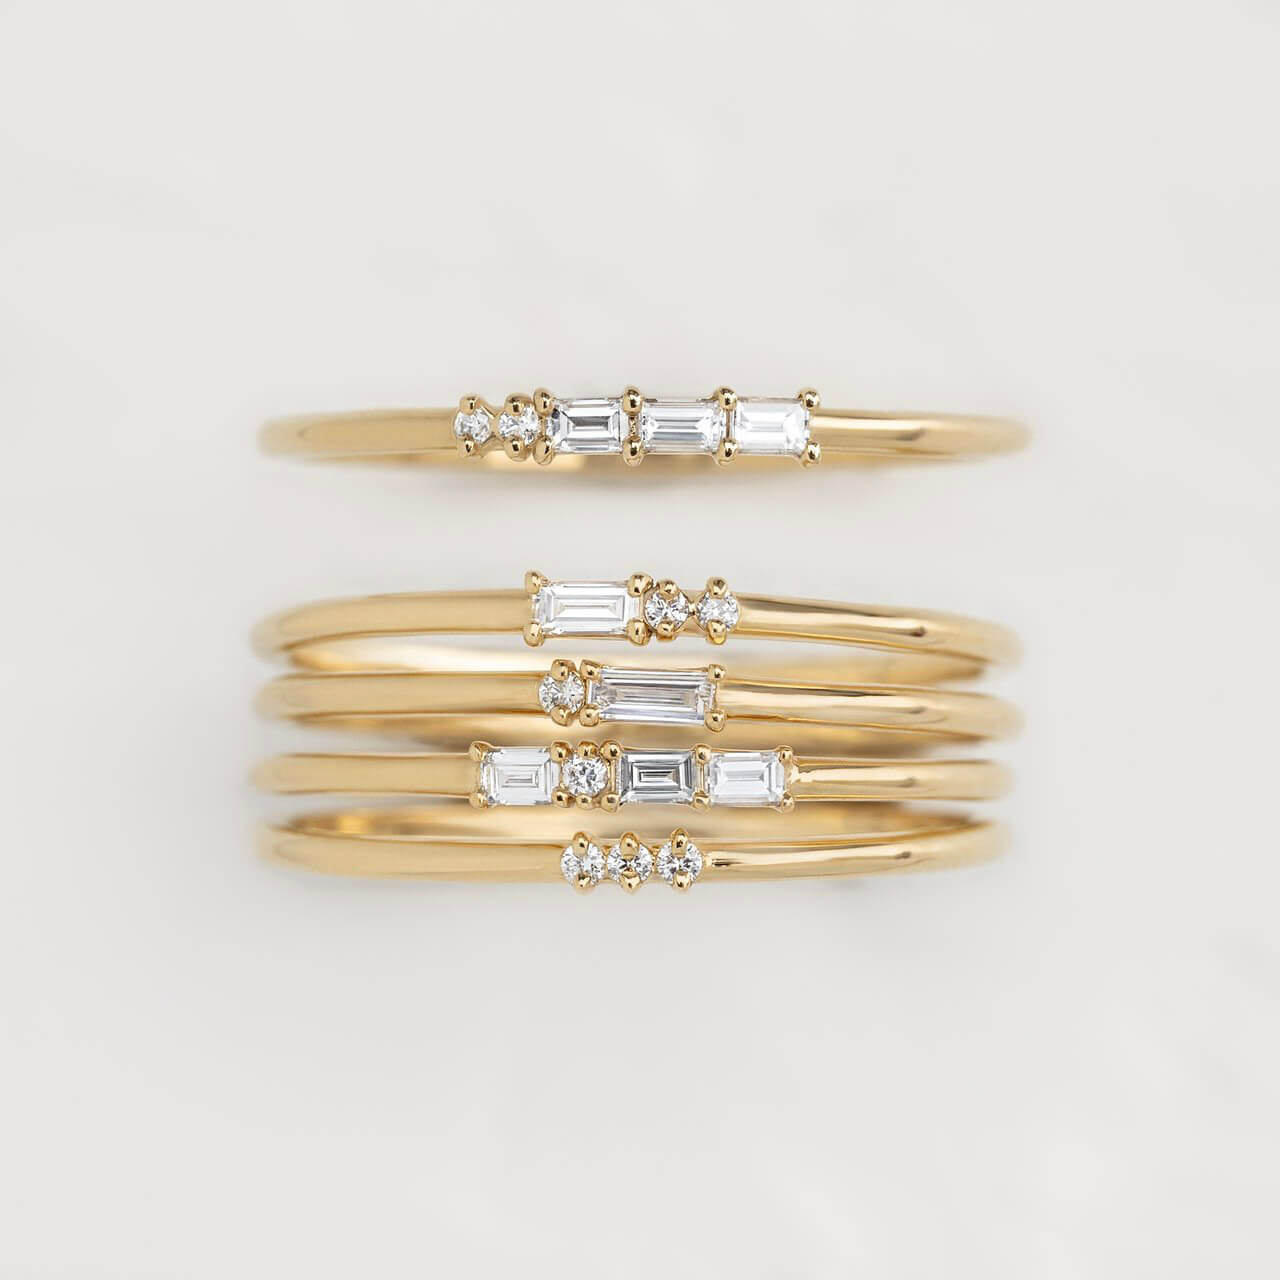 Morse Code Ring, Yellow Gold - Letter "J"